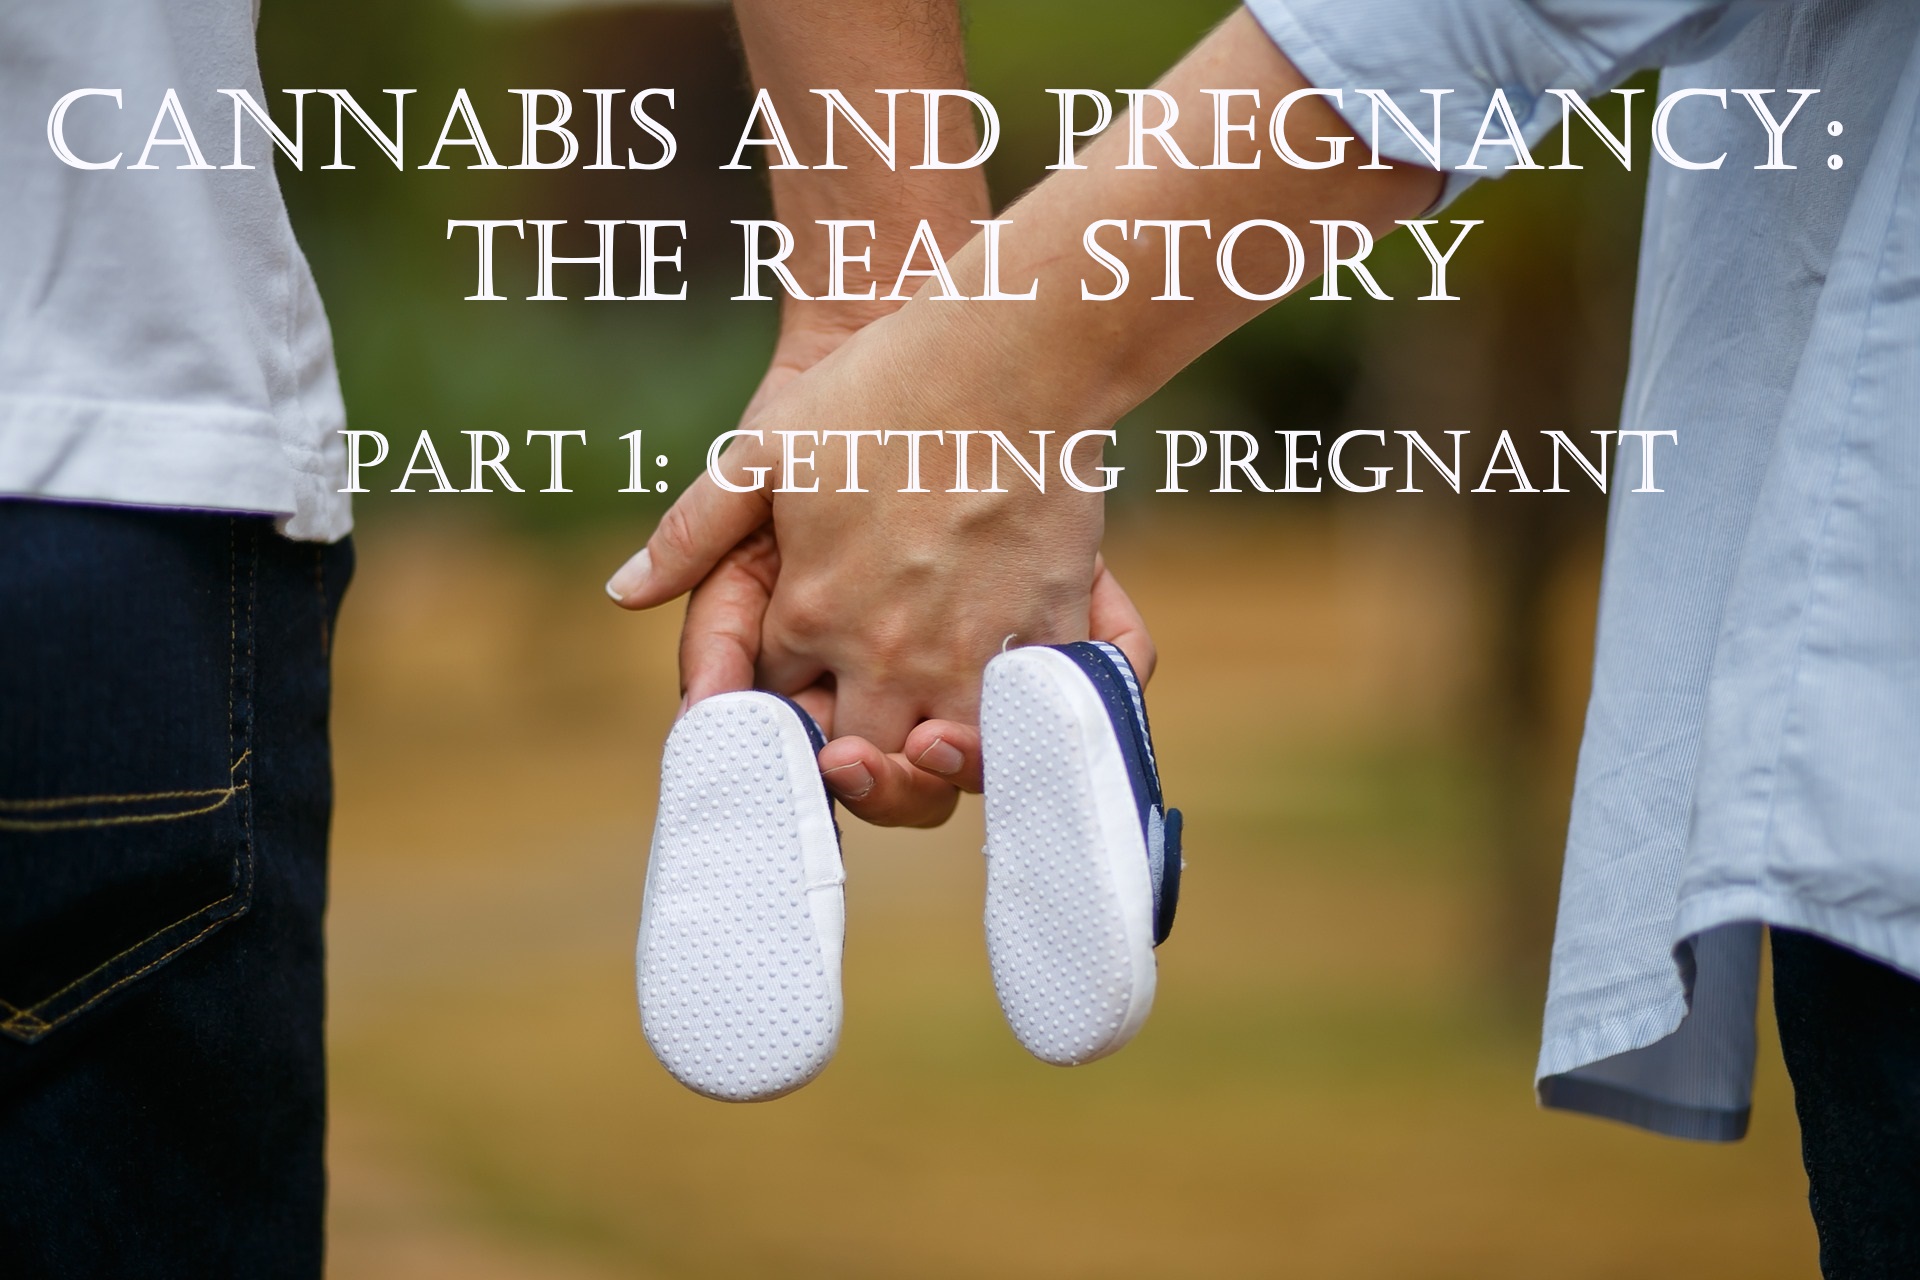 Cannabis and pregnancy, the real story: Getting pregnant